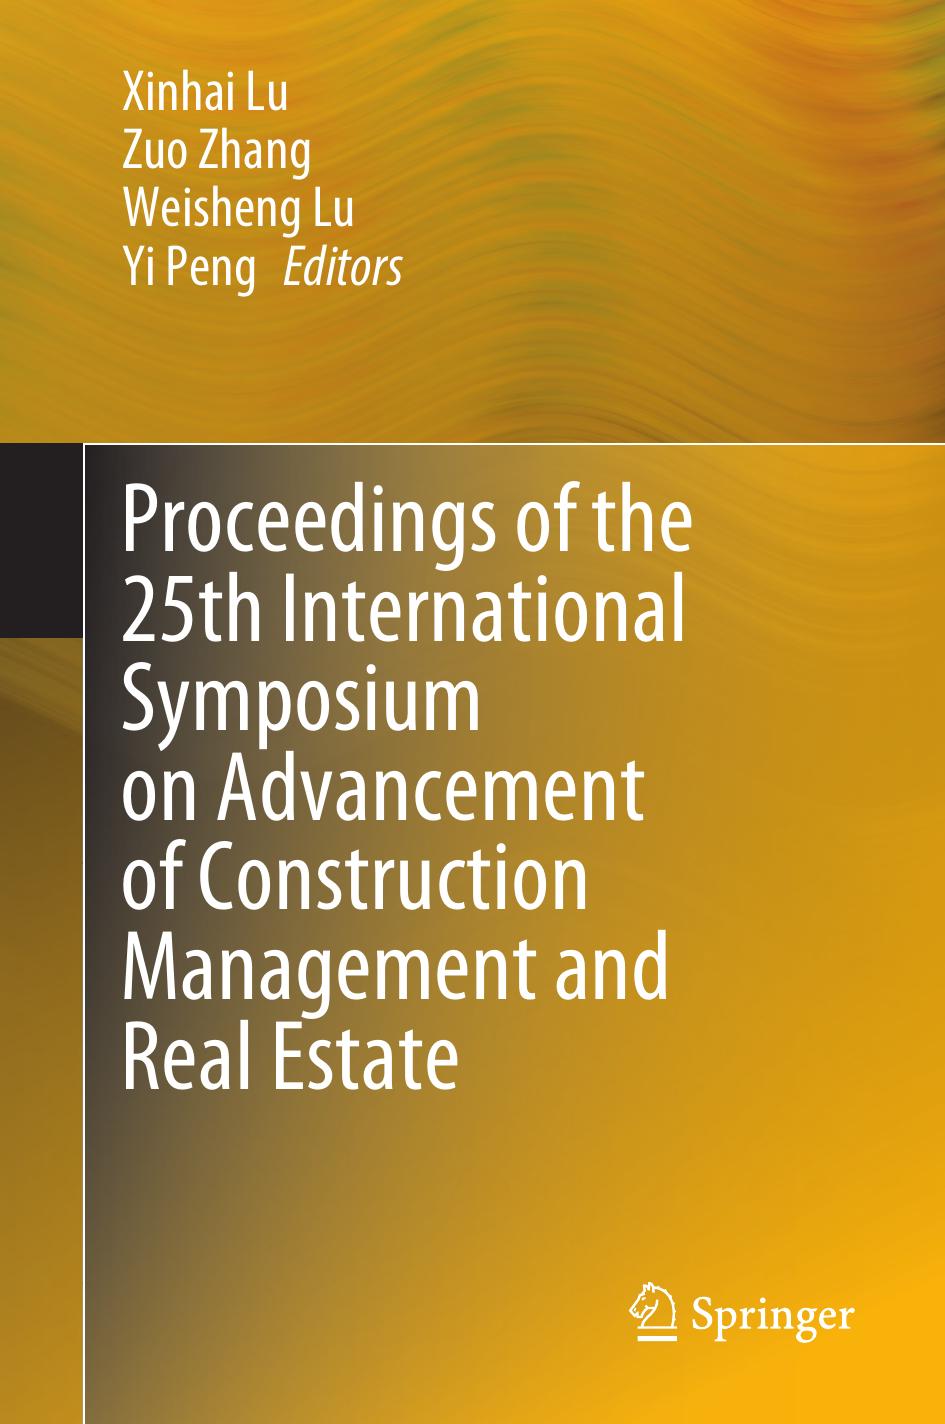 Proceedings of the 25th International Symposium on Advancement of Construction Management and Real Estate 2021